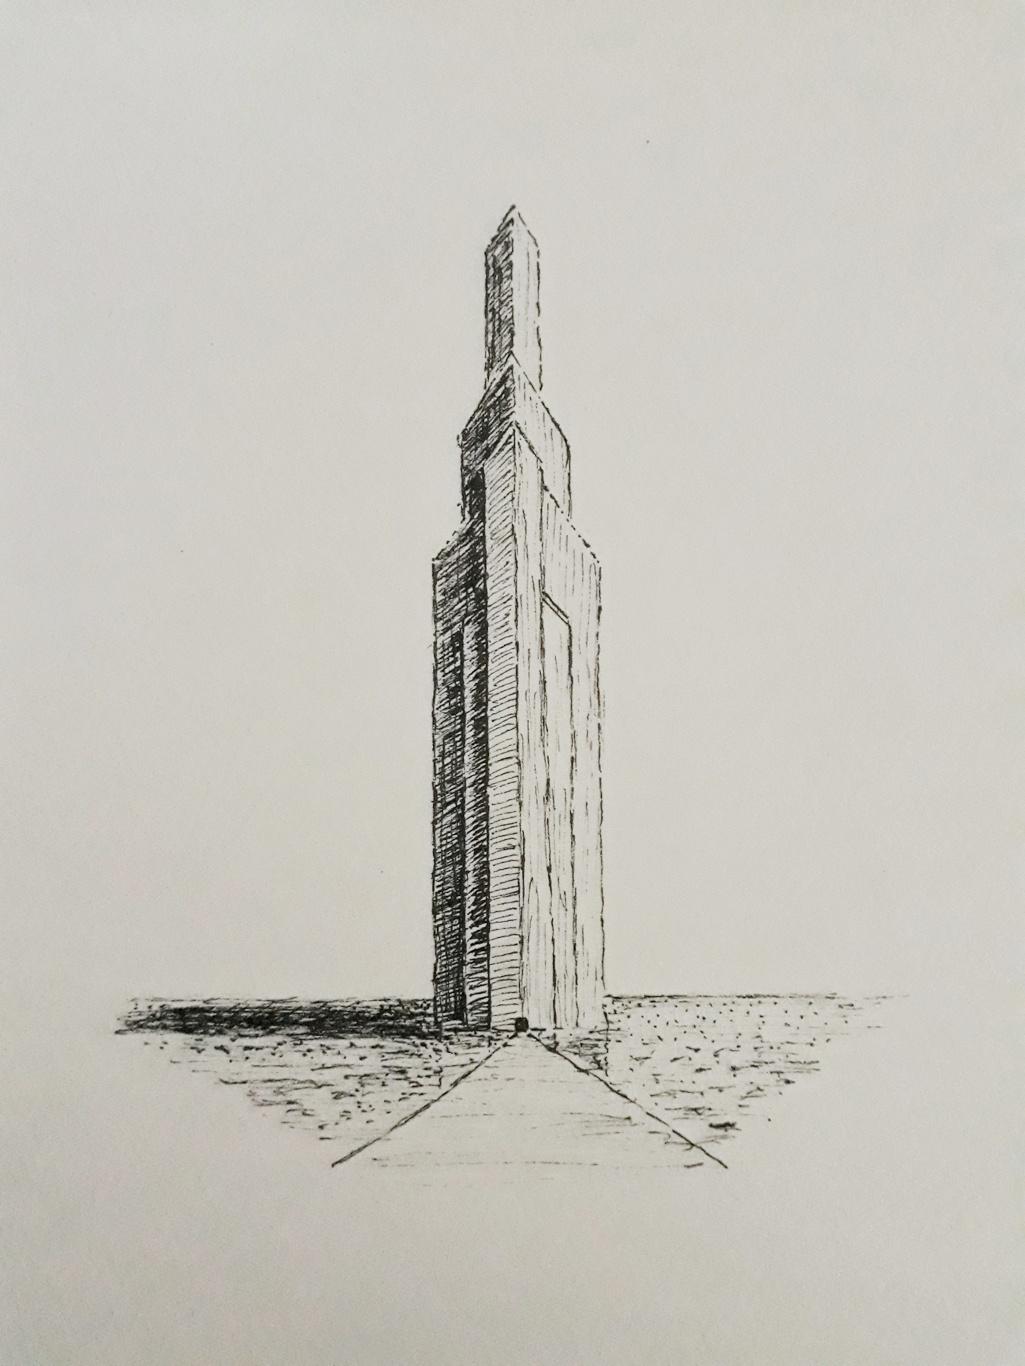 drawing of a tower in a desert